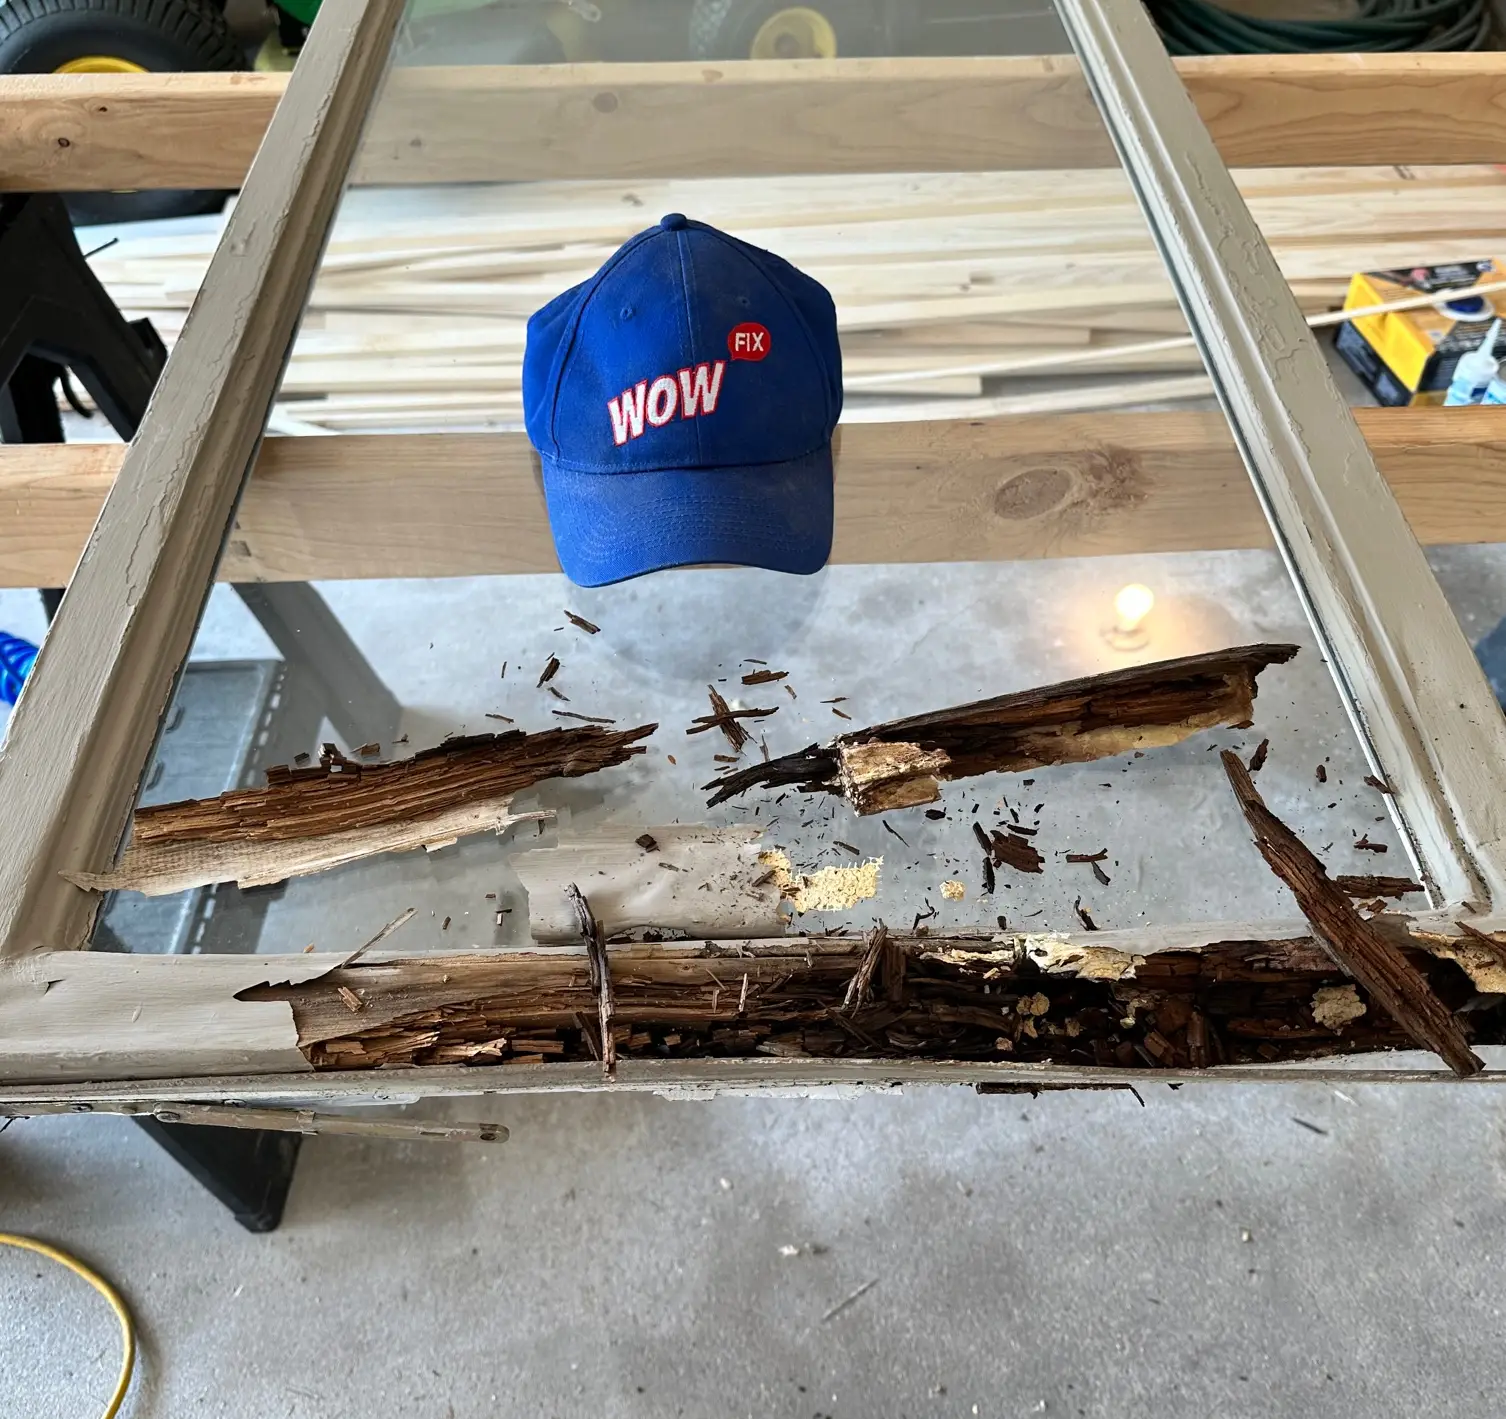 Decayed rotted window sash before repair: Illustrating the extent of damage and deterioration, highlighting the need for specialized restoration and replacement for improved functionality and visual appeal.